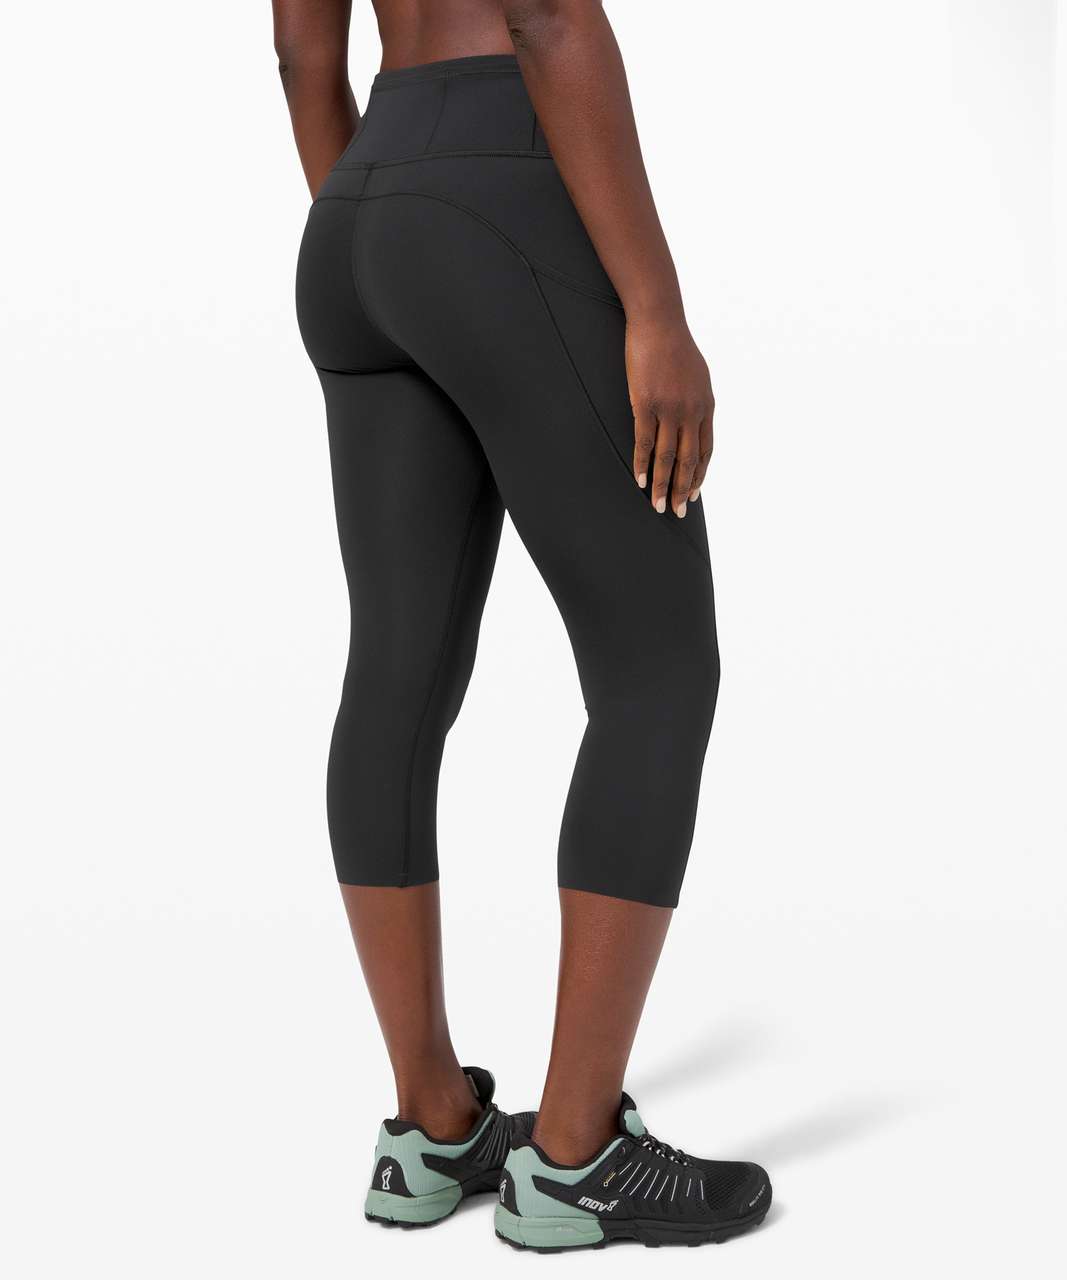 Lululemon Fast and Free Crop II 19" *Non-Reflective - Black